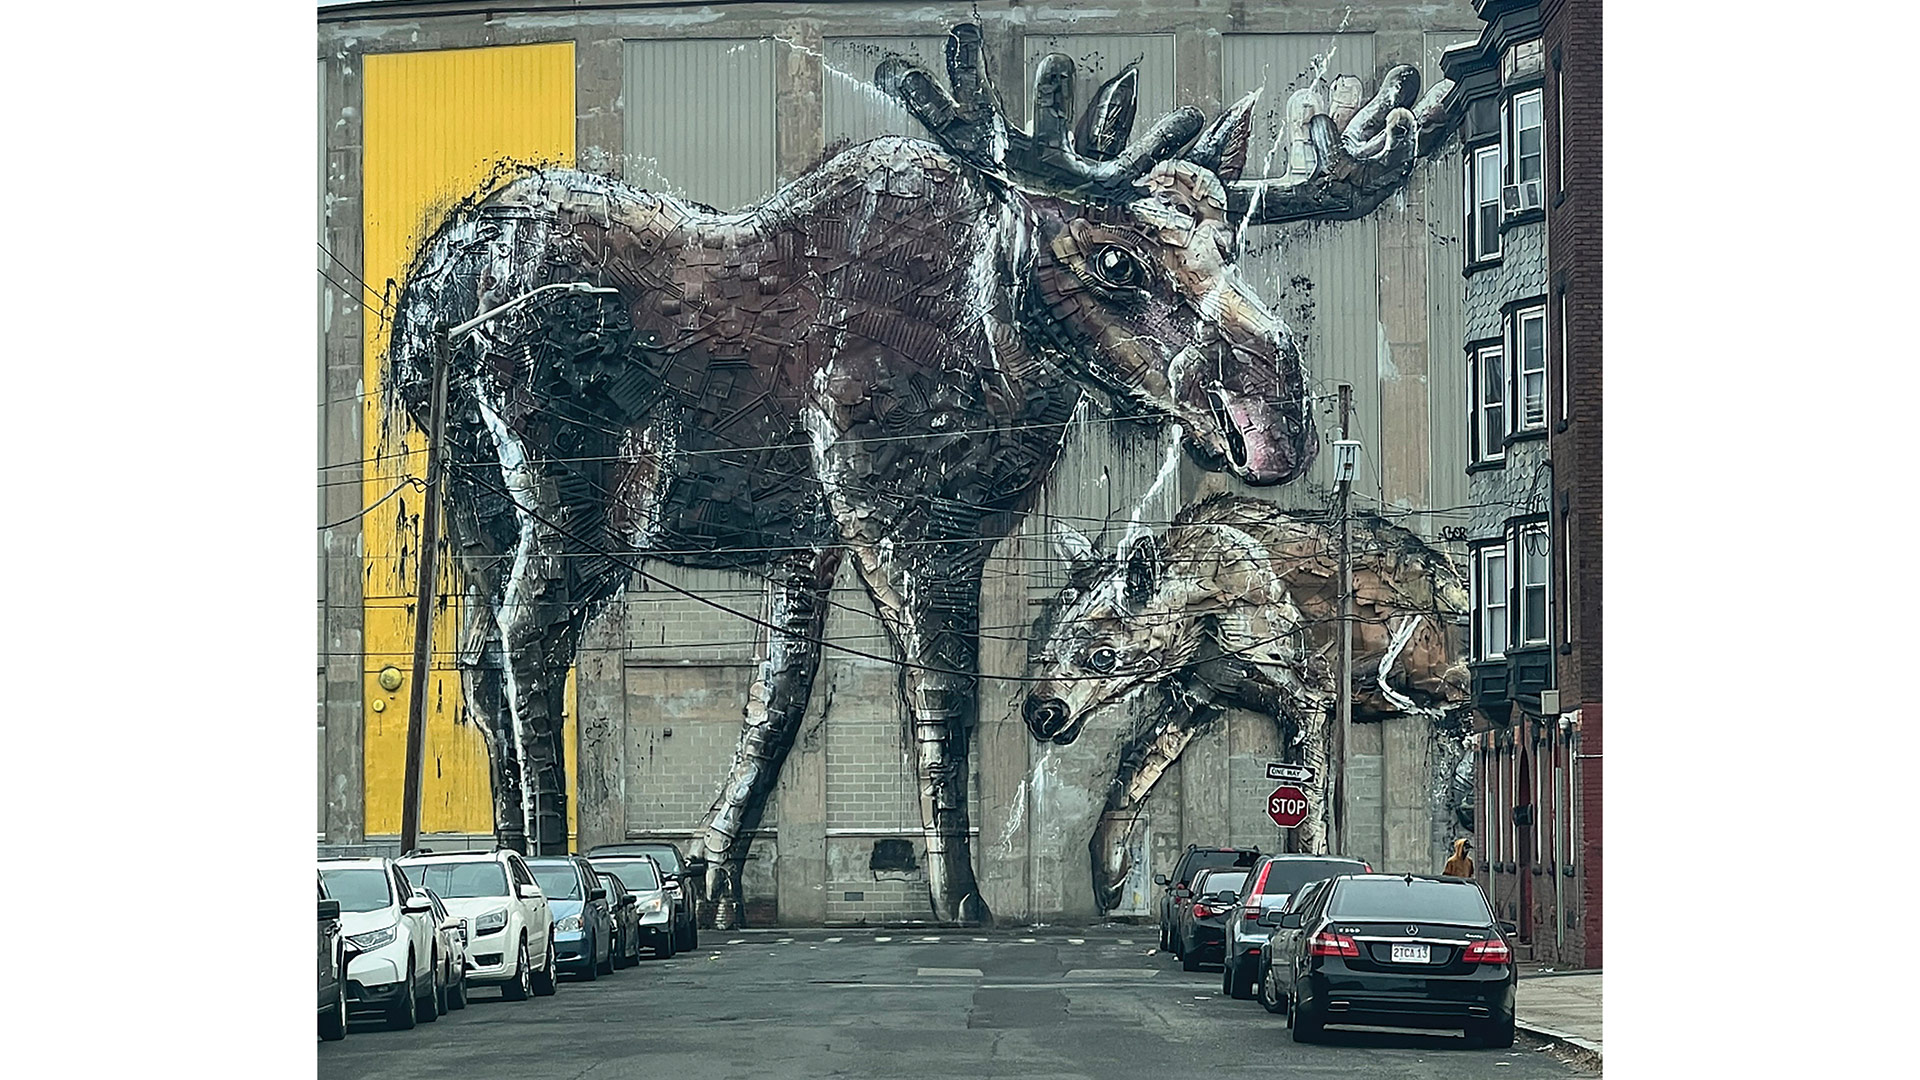 This mural created by the artist known as BORDALO II